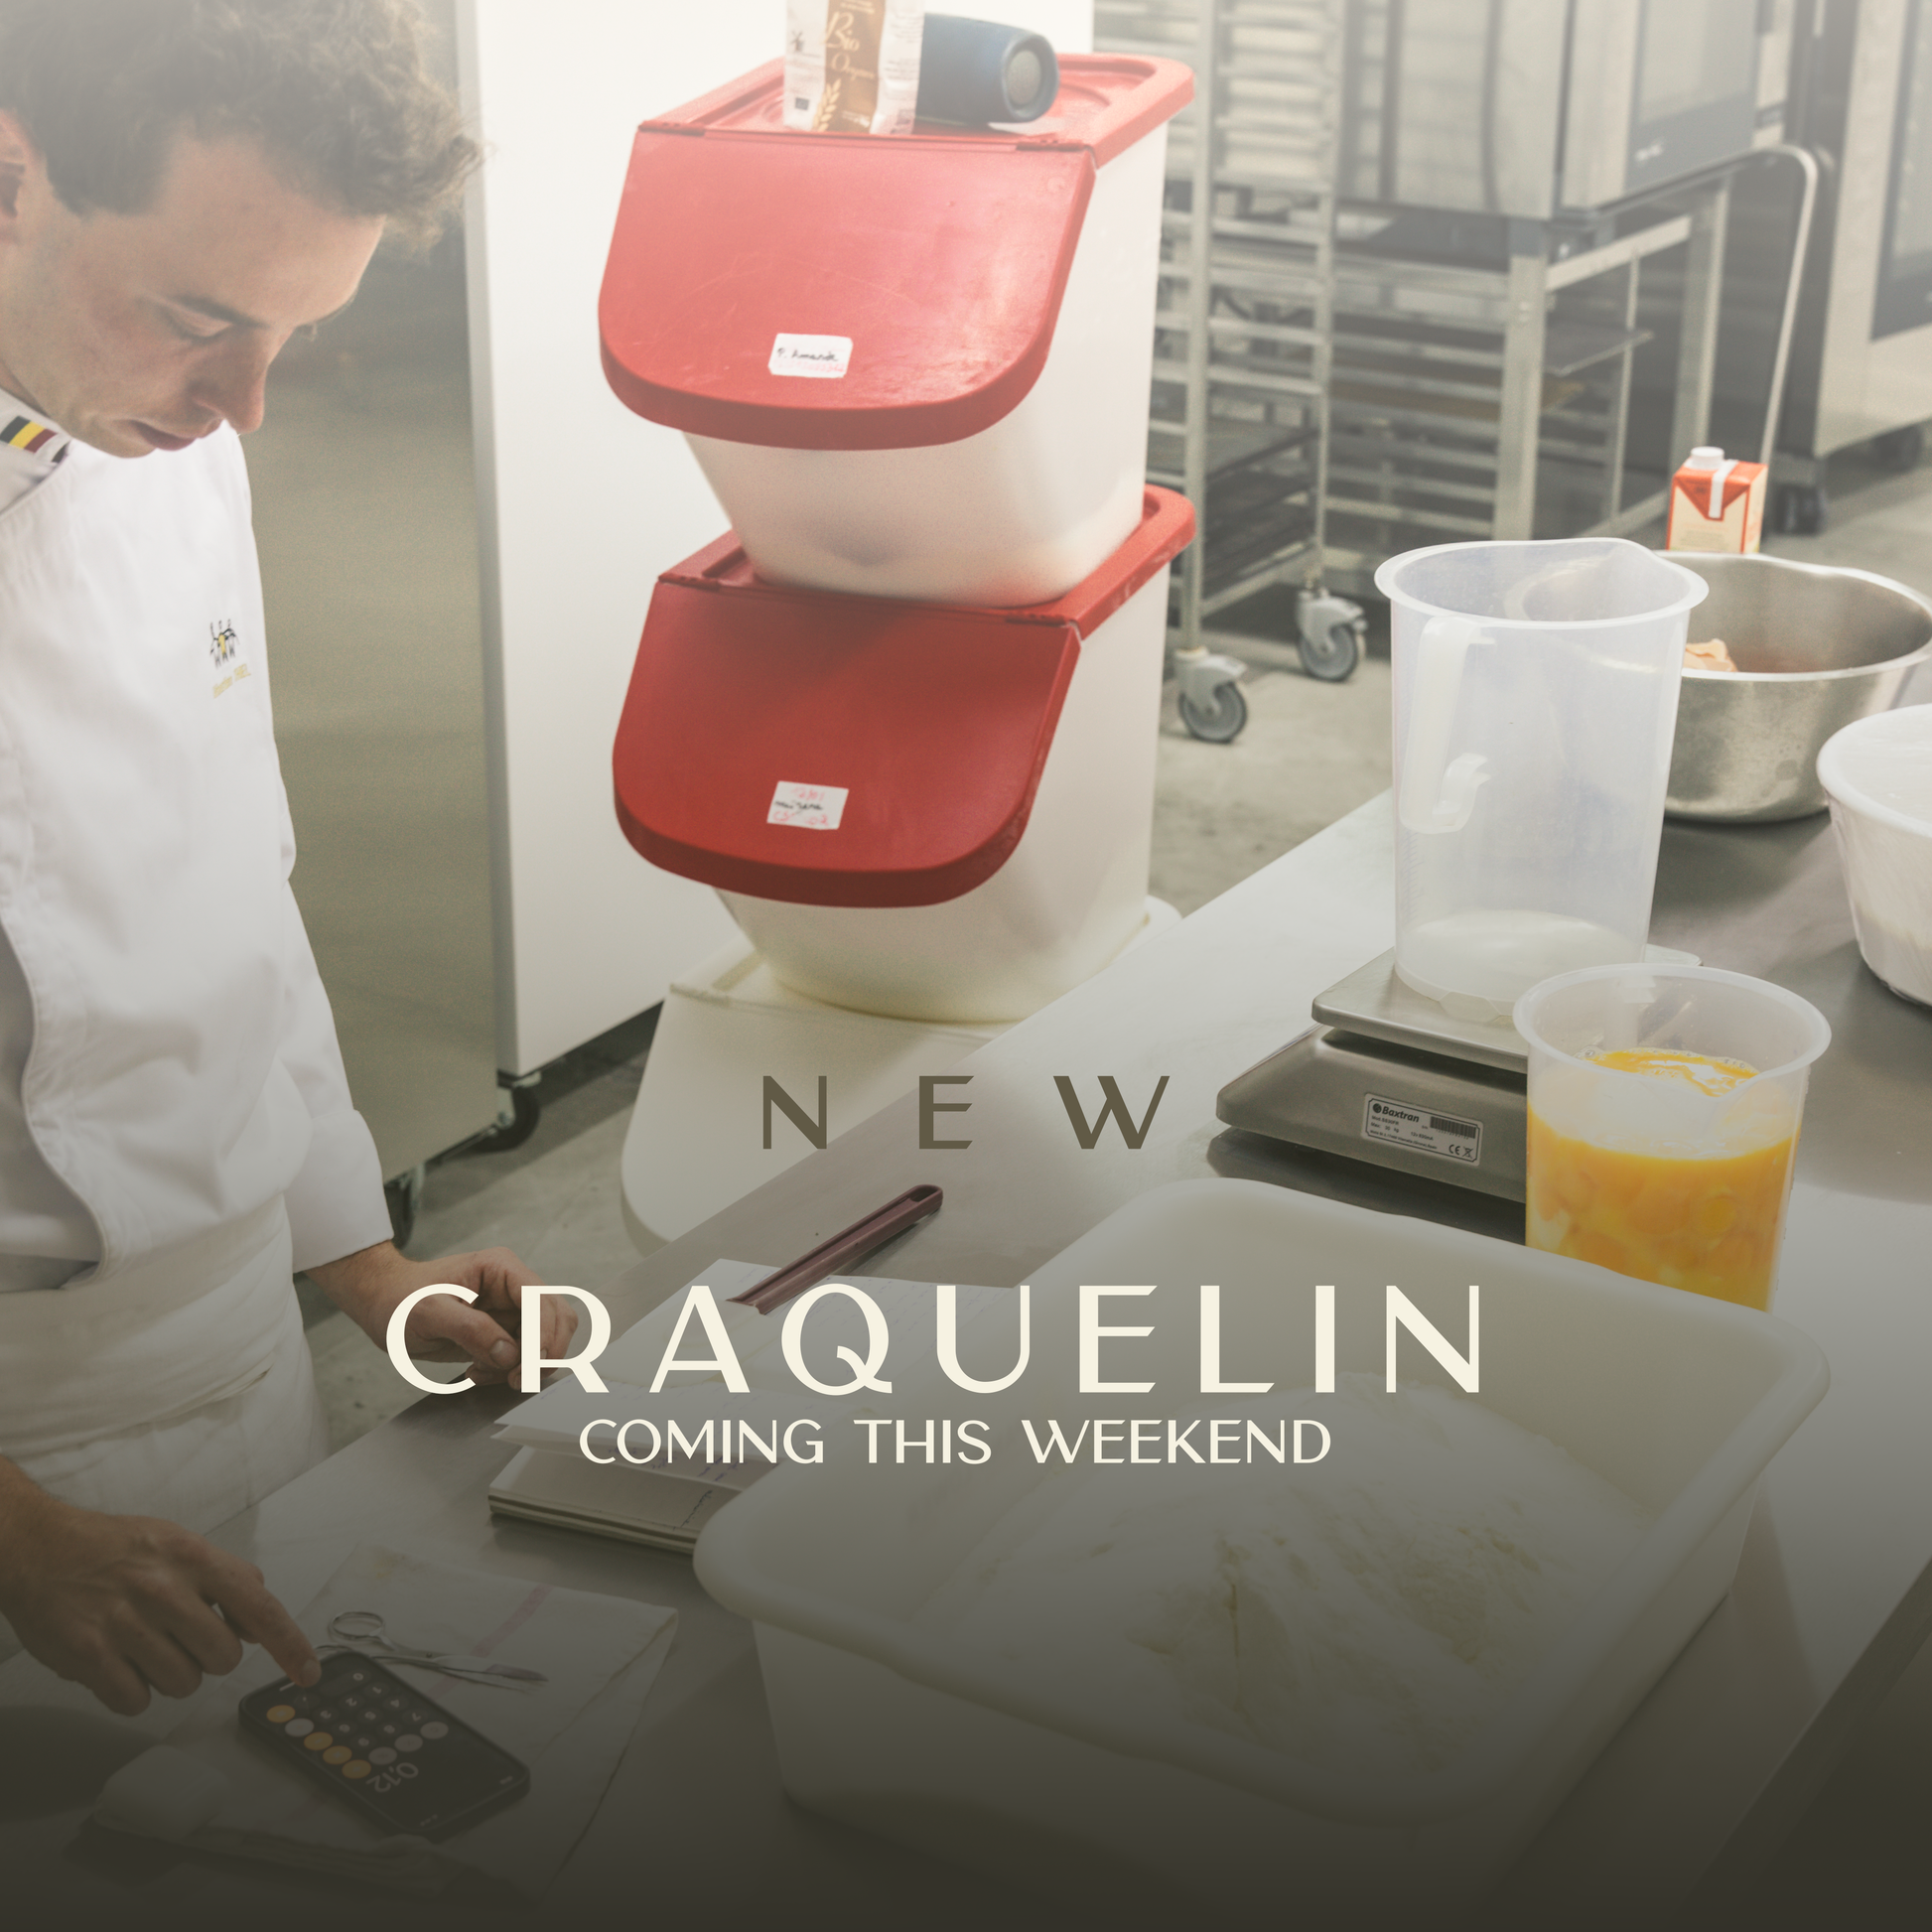 New Craquelin coming this weekend.